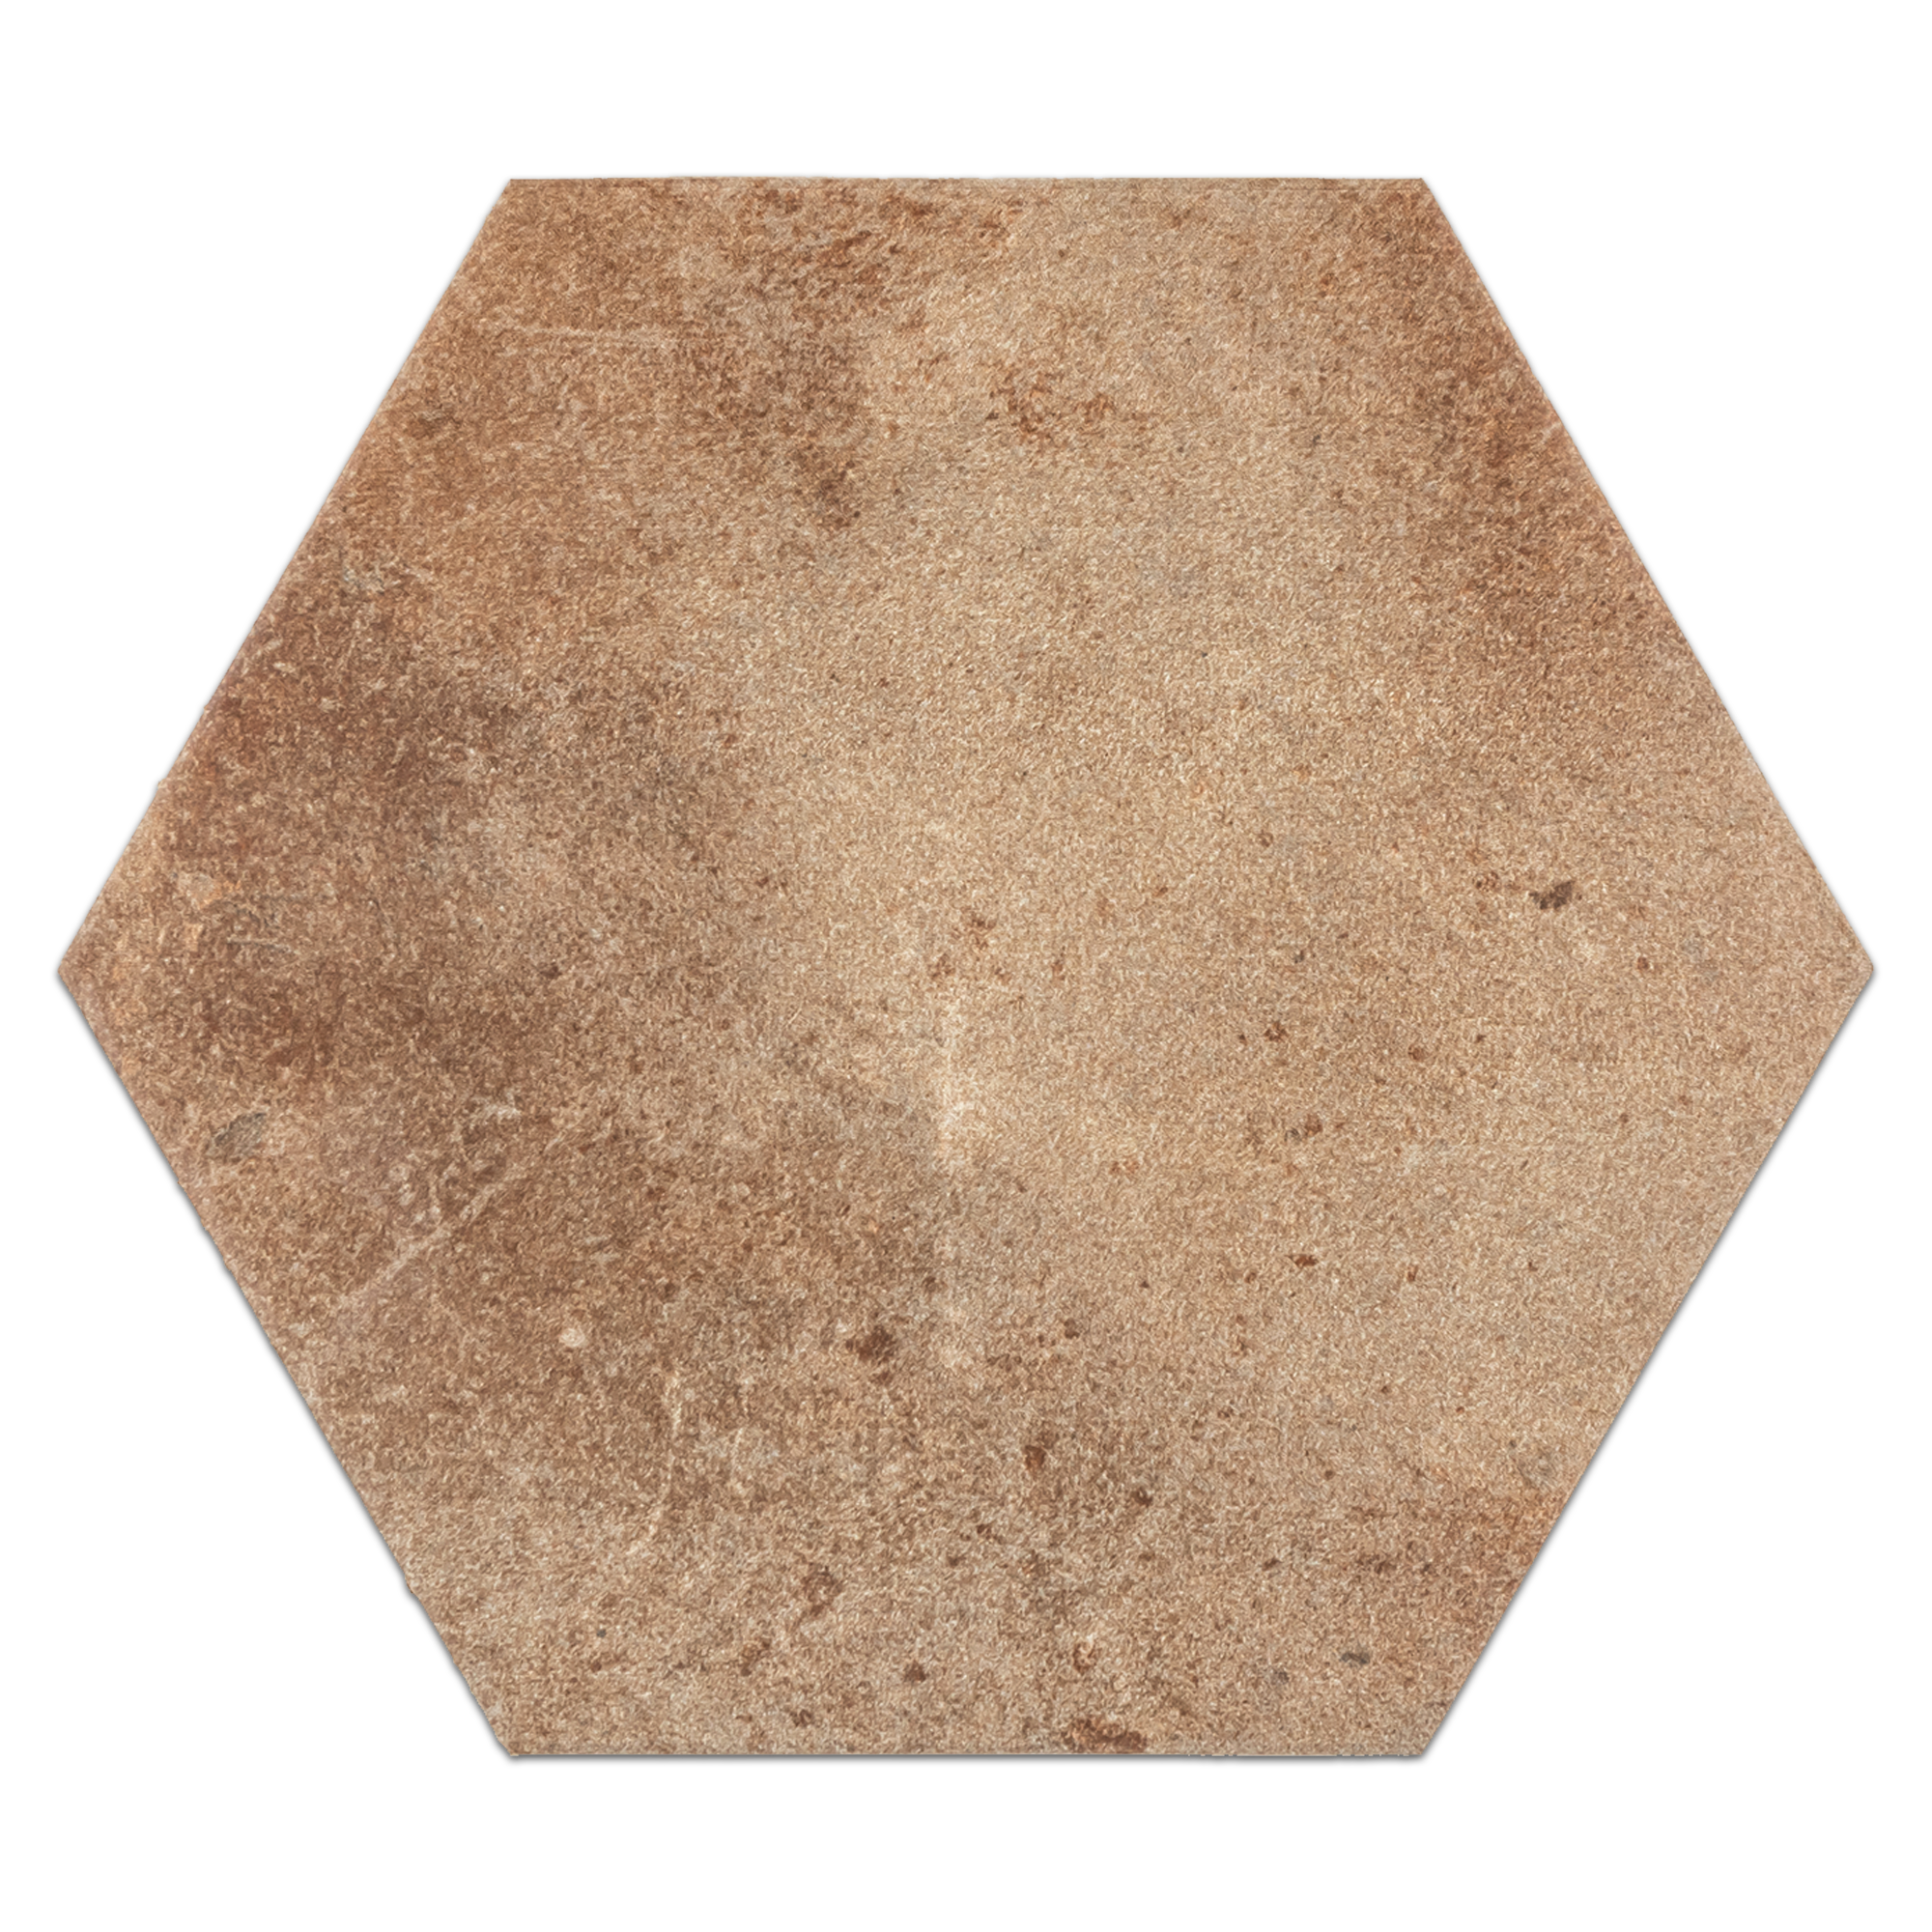 Elon Boston Brick South Porcelain Hexagon Tile, 11.2x12.7 inches, Natural Pressed Finish, for Flooring and Wall - Surface Group International.